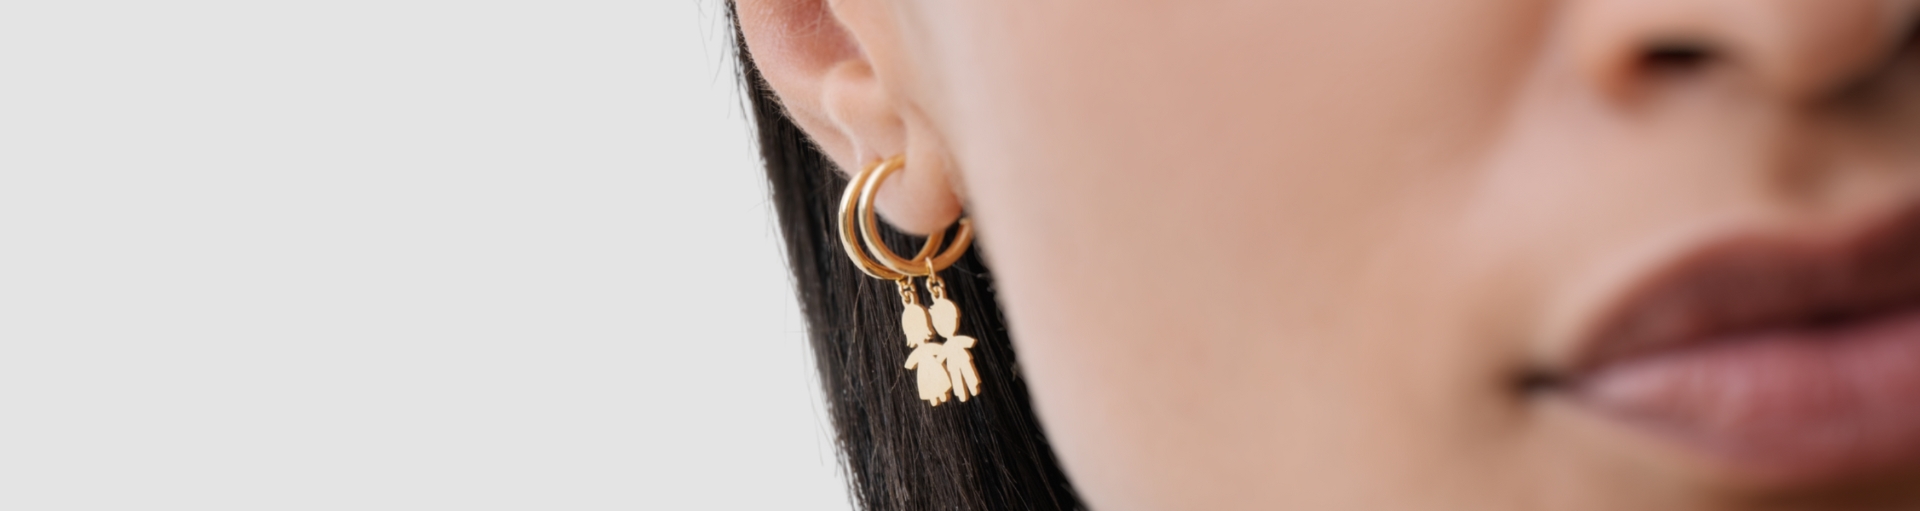 Baptisms and Communions Earrings